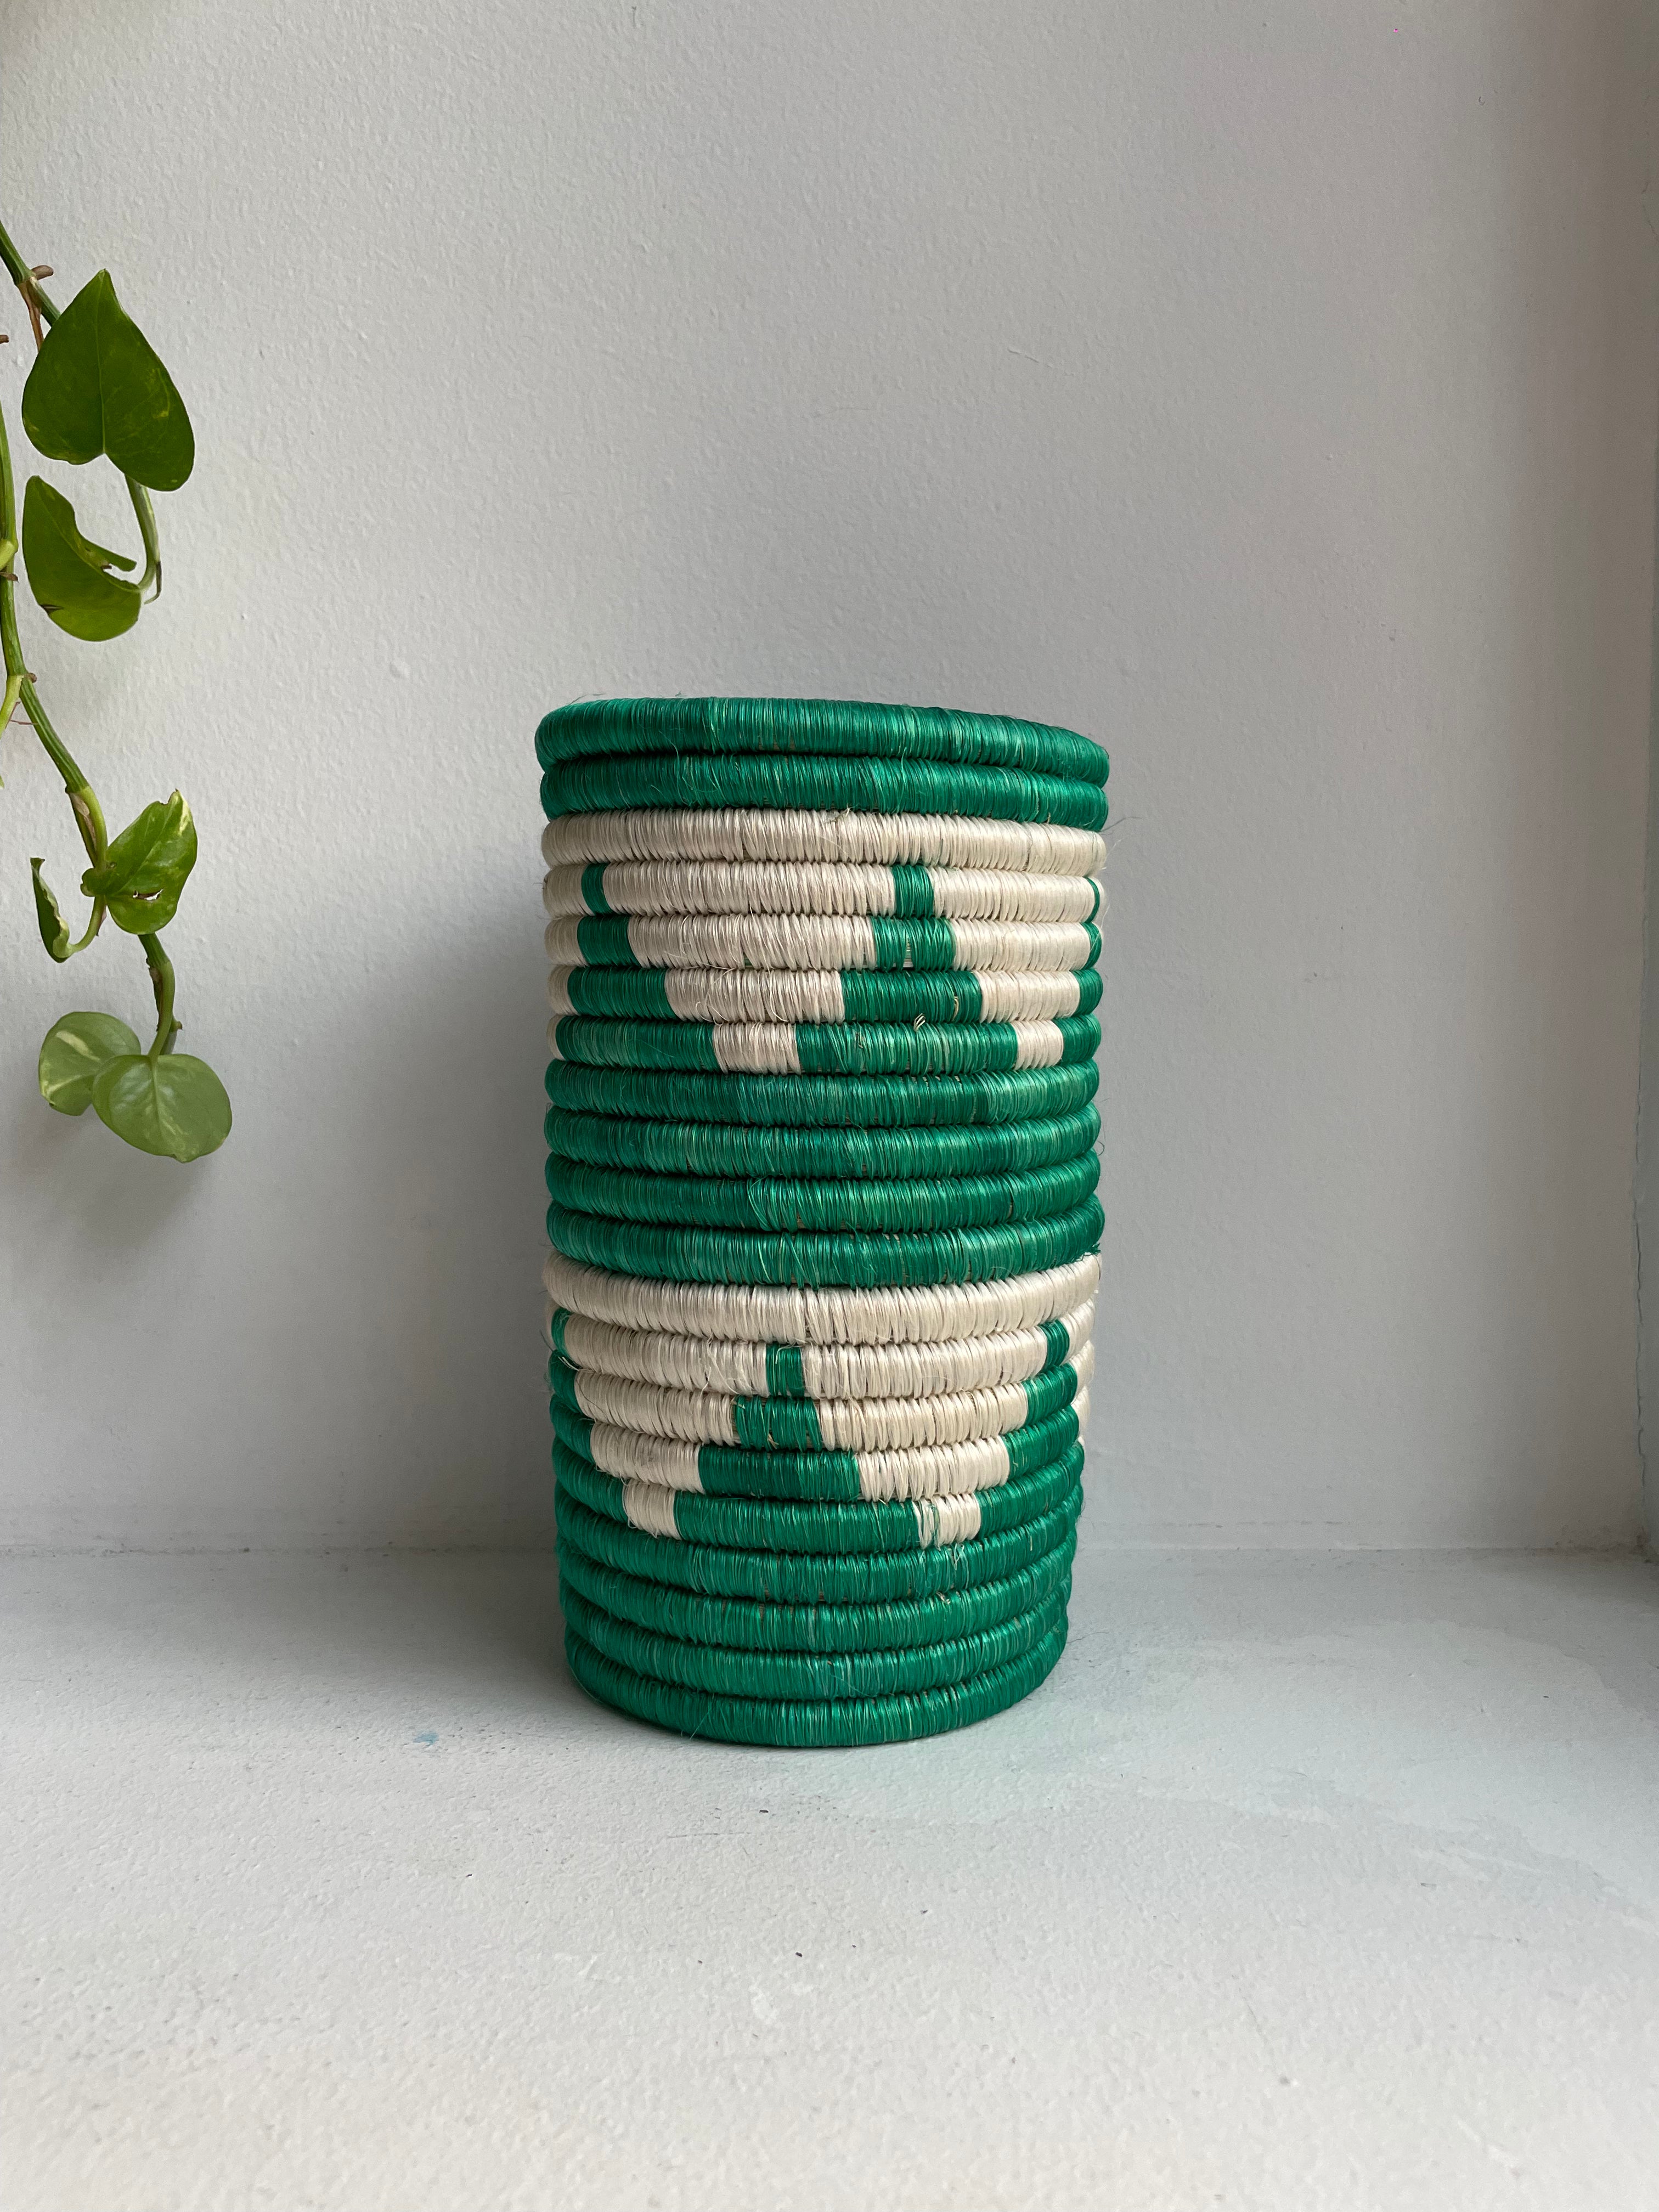 Display of green and white triangle vase